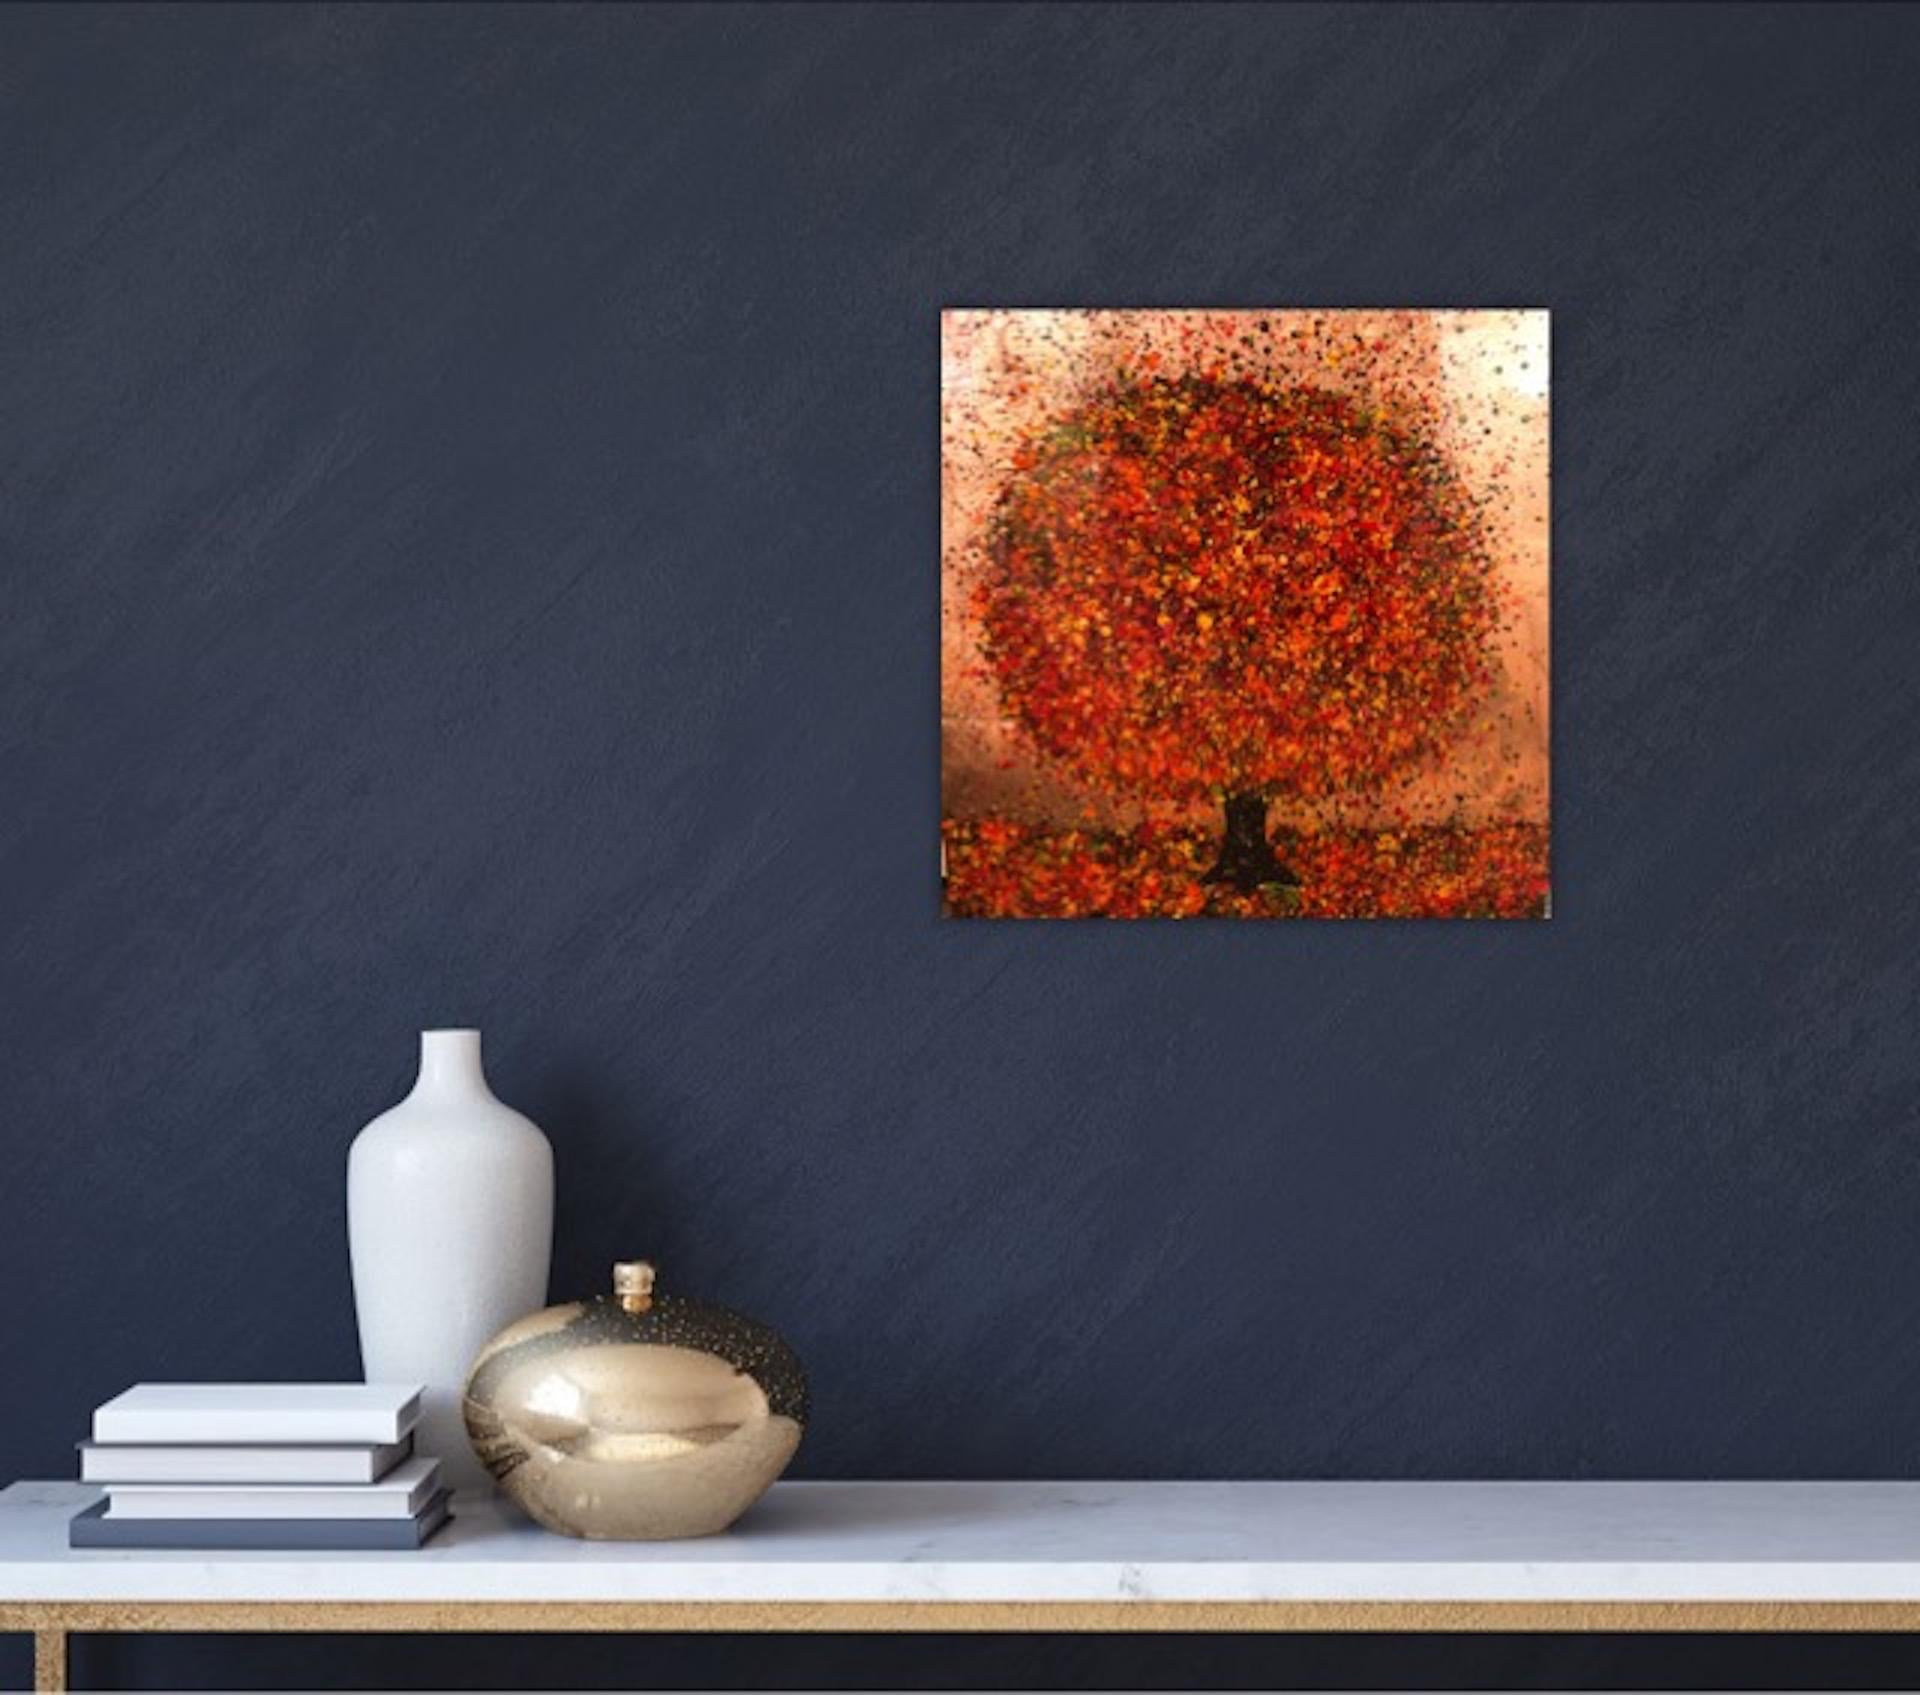 Nicky Chubb
Happy Red Autumn
Original Landscape Painting
Acrylic Paint, Copper Leaf and Resin on Canvas
Canvas Size: H 30cm x W 30cm x D 4cm
Sold Unframed
Free Shipping

Happy Red Autumn is an original painting by Nicky Chubb. The copper leaf and